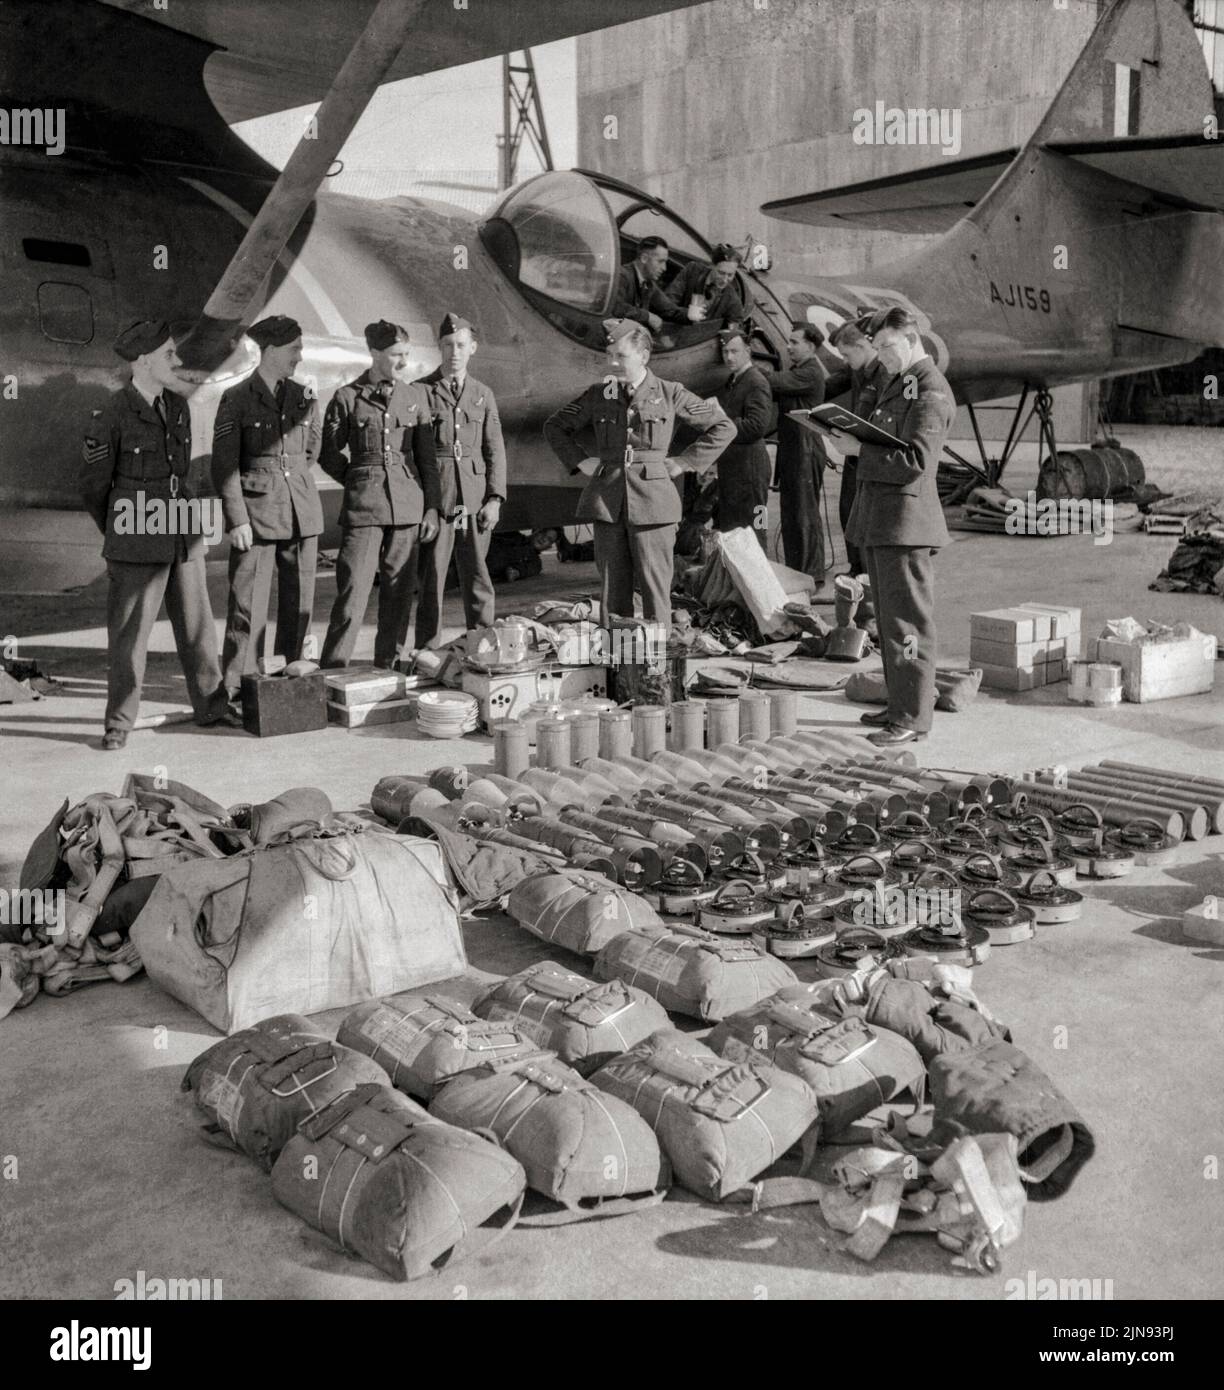 Air and ground crew of No. 202 Squadron RAF check equipment and ordnance issued to Consolidated Catalina Mark I, AJ159 'AX-B', on the slipway at North Front, Gibraltar, in preparation for a patrol.  The Catalina was a flying boat and amphibious aircraft produced in the 1930s and 1940s. During World War II, they were used in anti-submarine warfare, patrol bombing, convoy escort, search and rescue missions (especially air-sea rescue), and cargo transport. Stock Photo